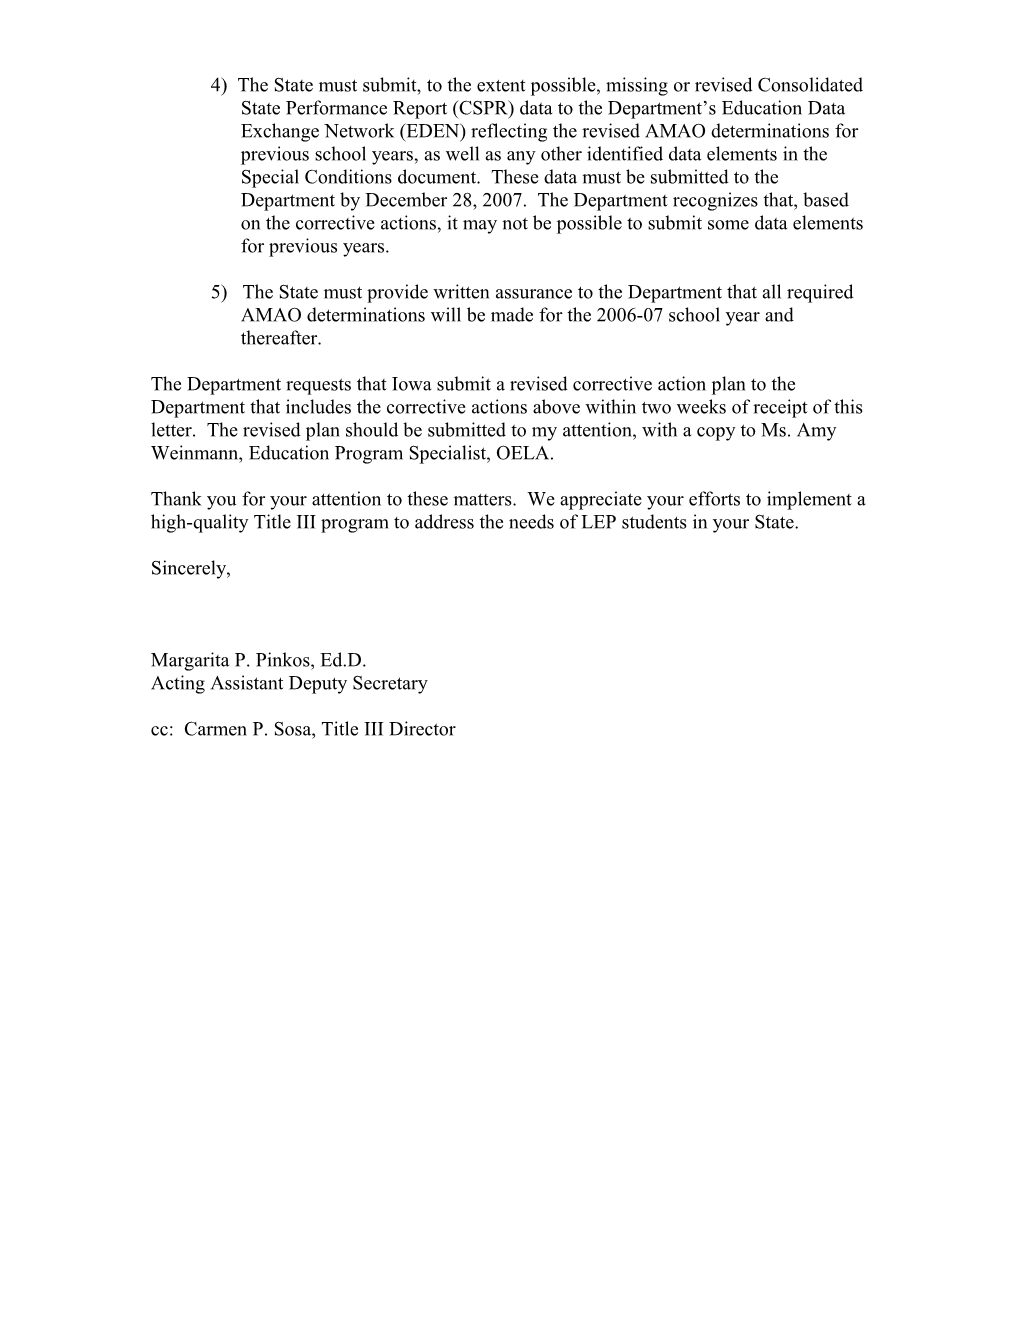 Letter Regarding the Title III, Part a Grant Award Made to Iowa MS Word